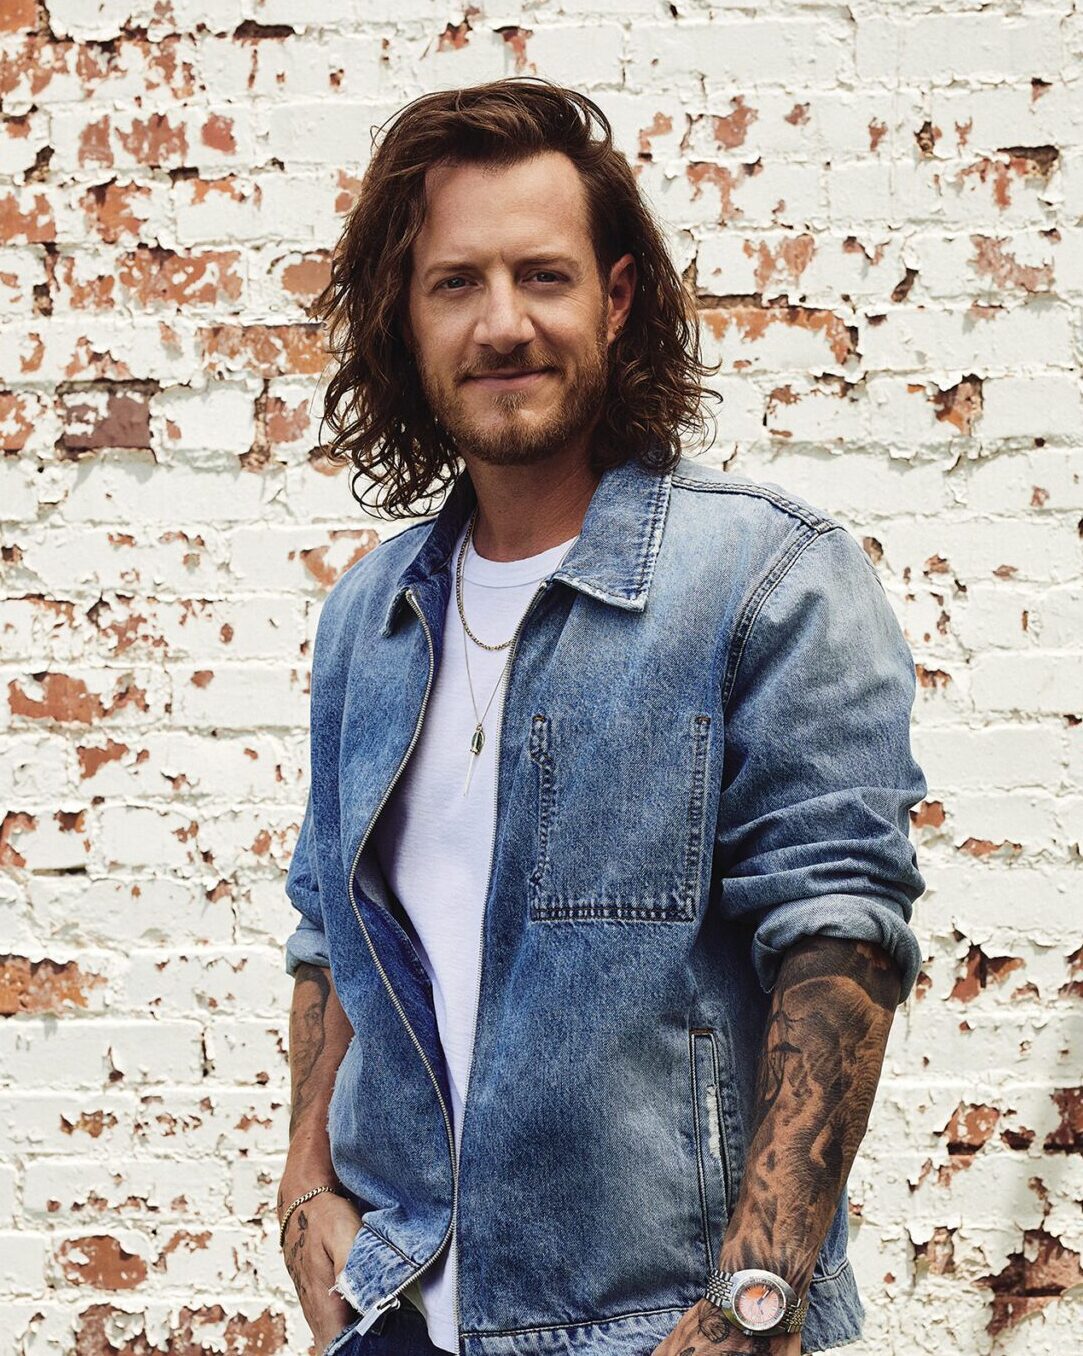 Country Music Sensation Tyler Hubbard Announced as the Saturday